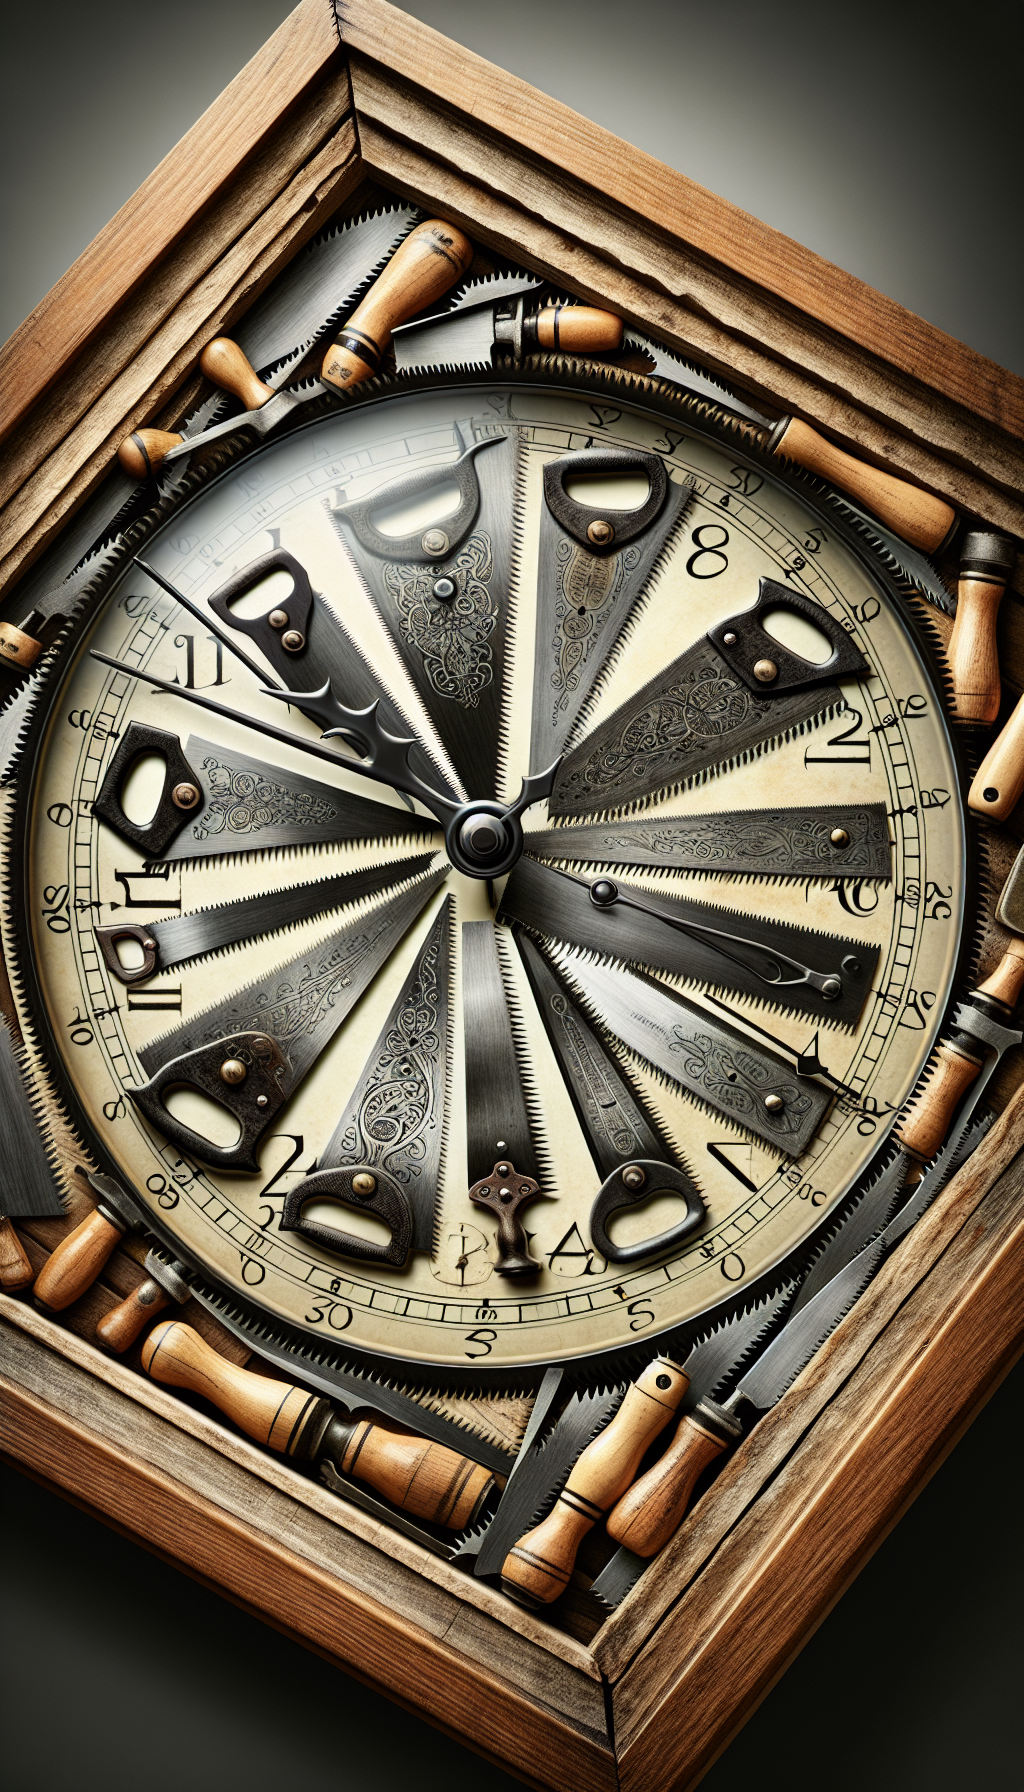 The illustration showcases a partially transparent vintage clock overlaying various antique crosscut saws, with their teeth patterns morphing into the clock's hour marks. Each saw blade reflects a distinct era's style, with intricate engravings indicating their identities. The clock's hands are fashioned from miniature saws, pointing towards the unique characteristics that define their timeless utility in woodworking history.